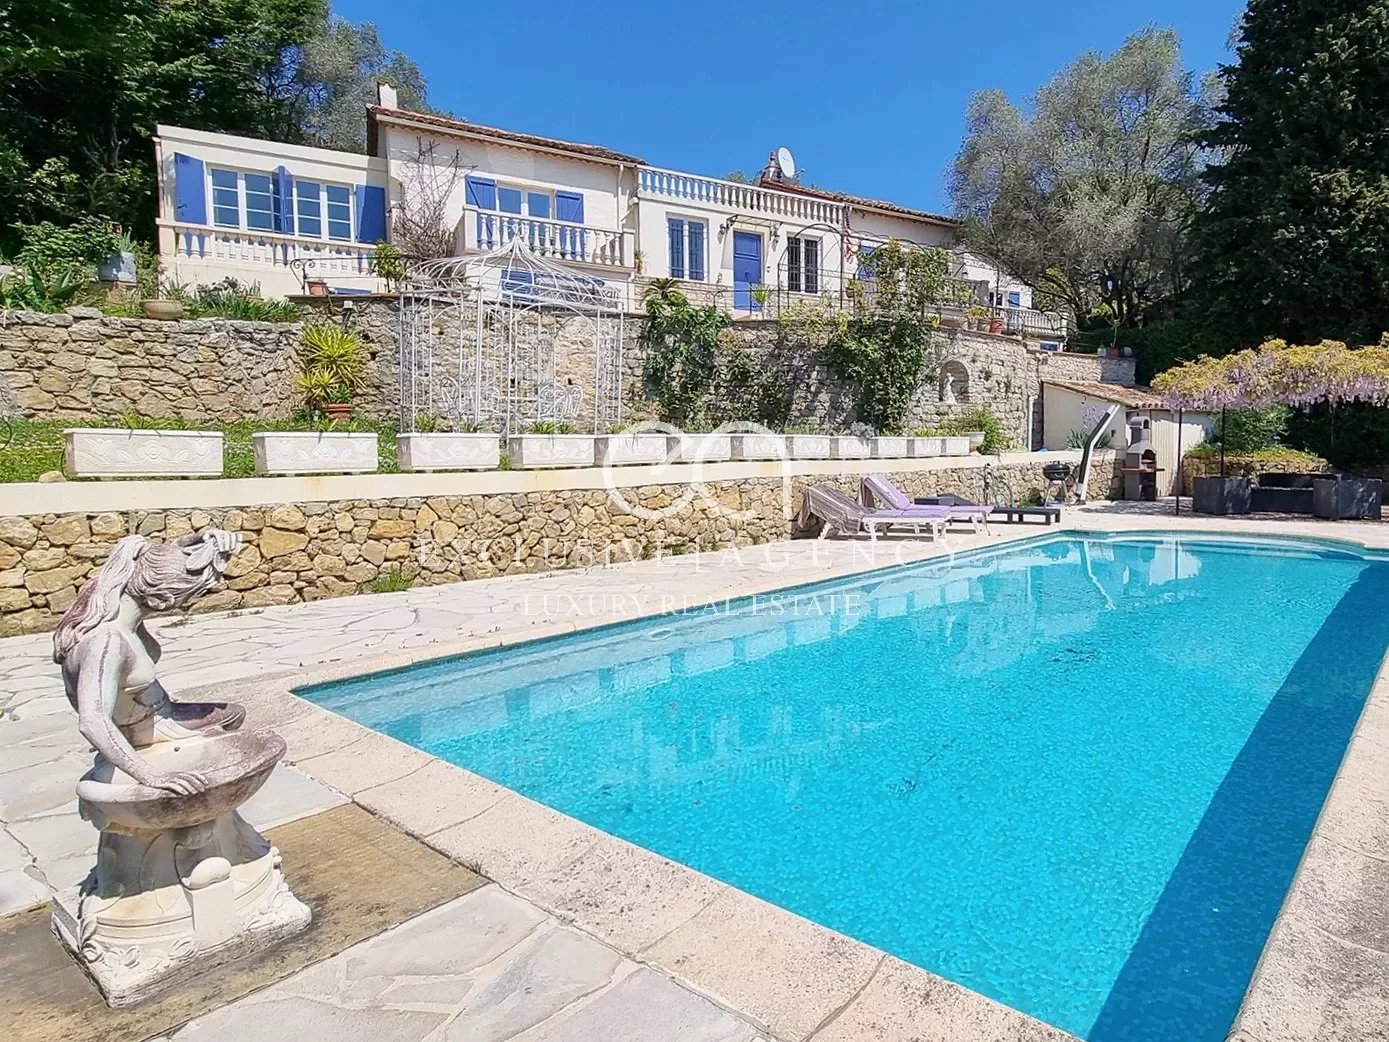 Villa in Le Cannet with garden and swimming pool photo 2